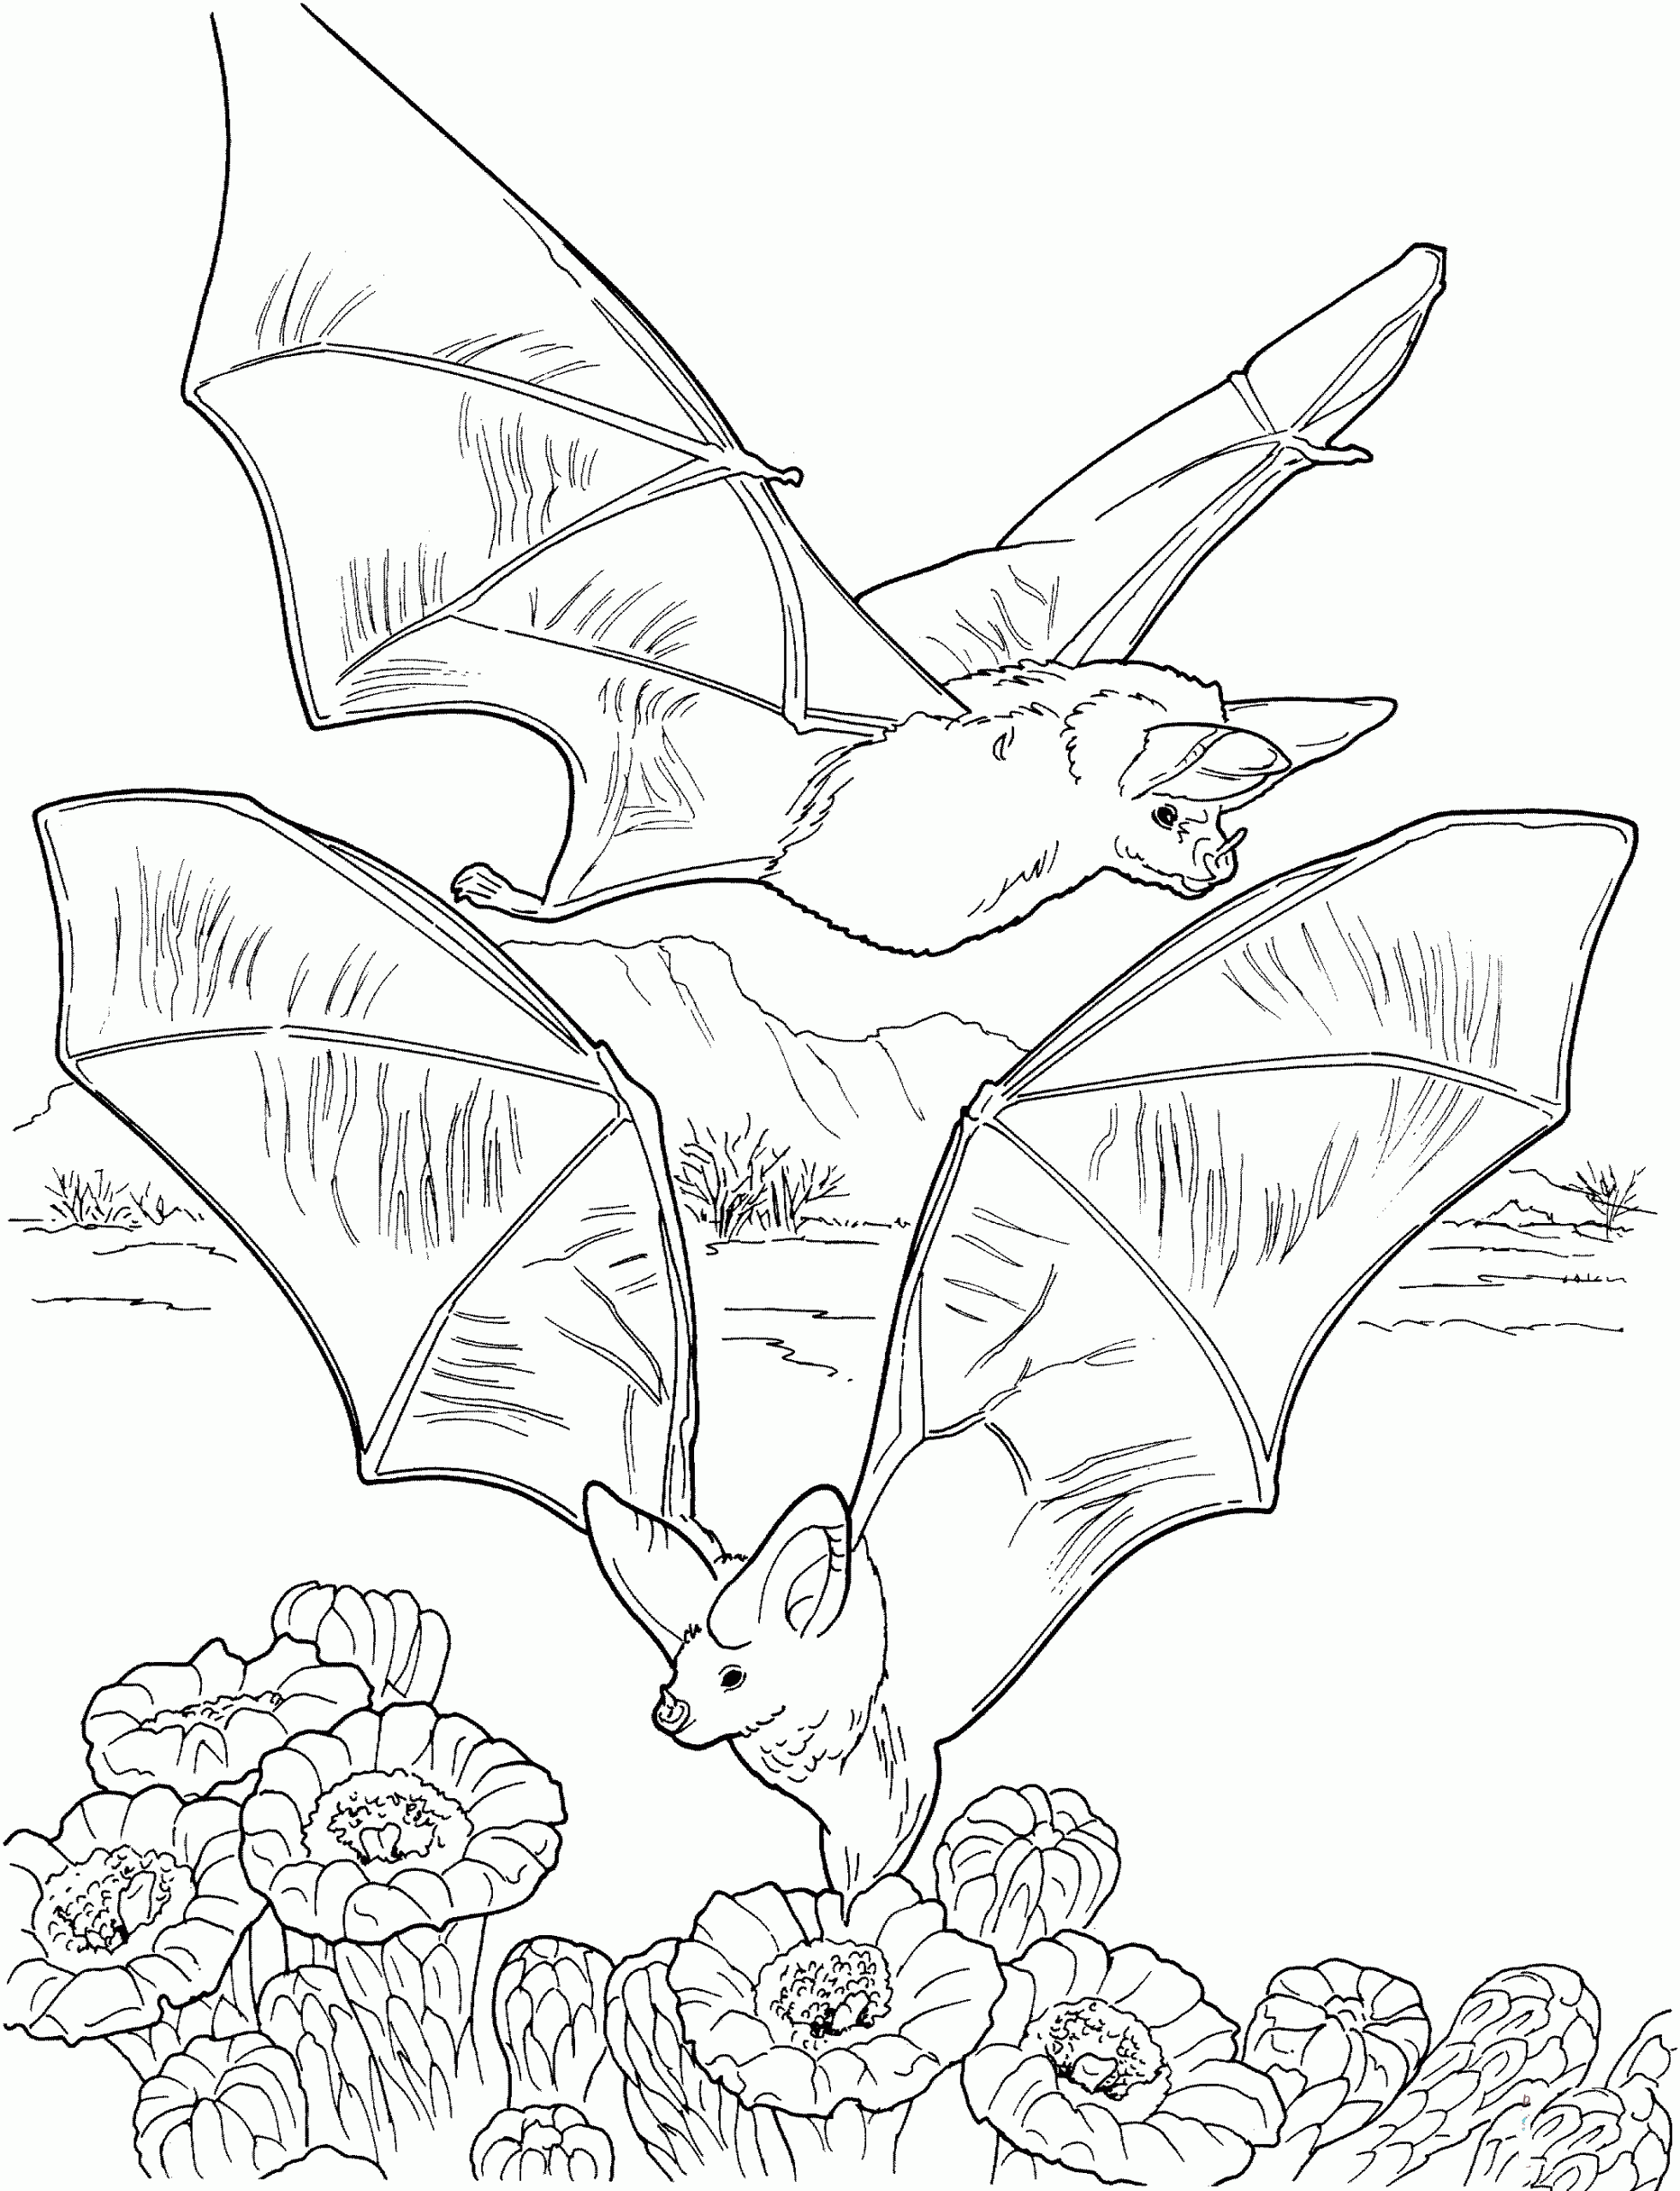 Two Bats Gathering NectarColoring Page Coloring Page